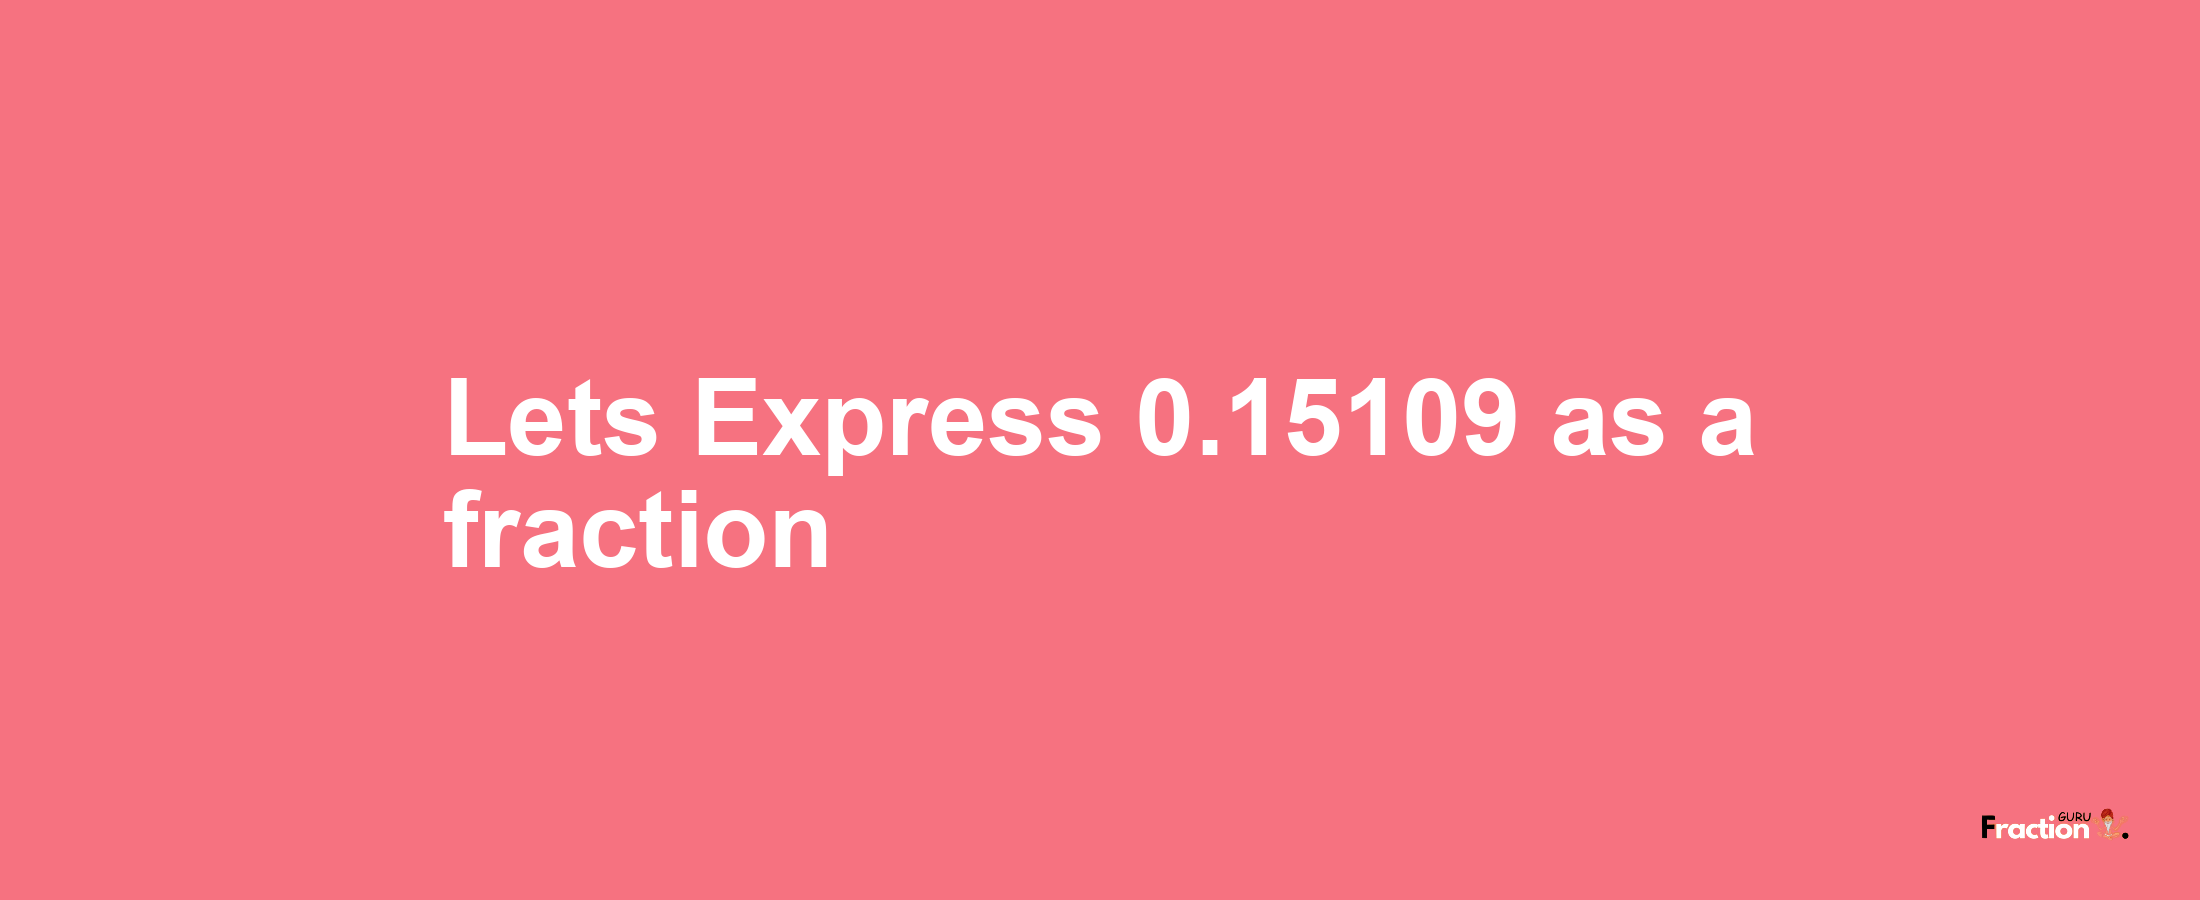 Lets Express 0.15109 as afraction